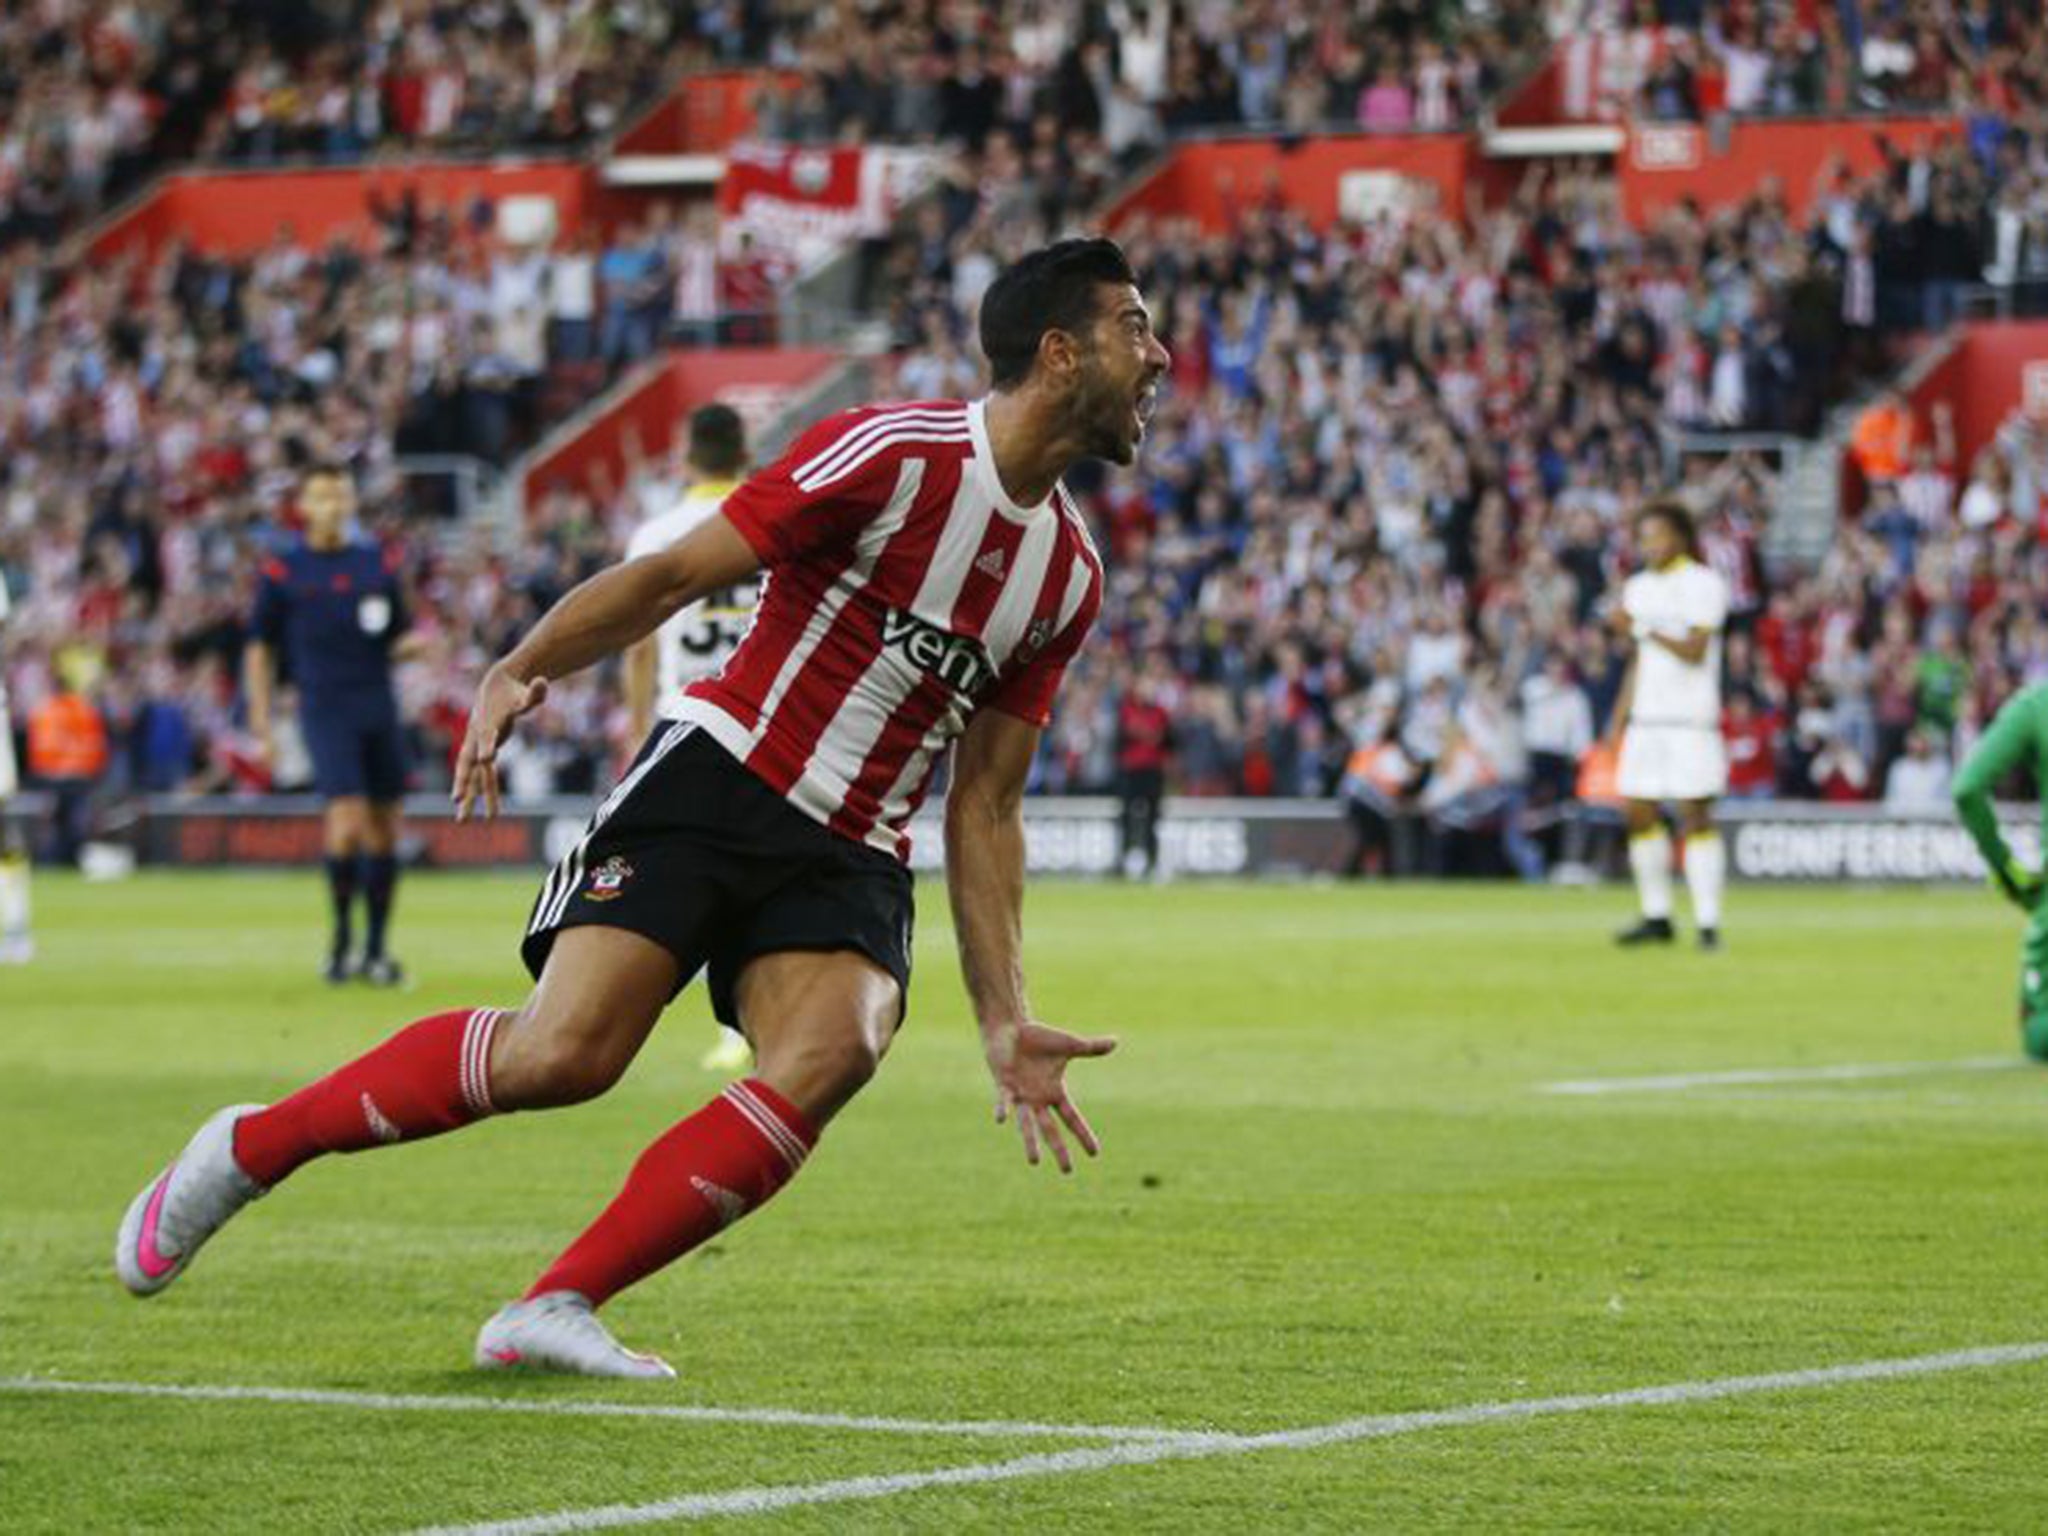 Graziano Pelle wheels away in celebration after scoring the opening goal for Southampton